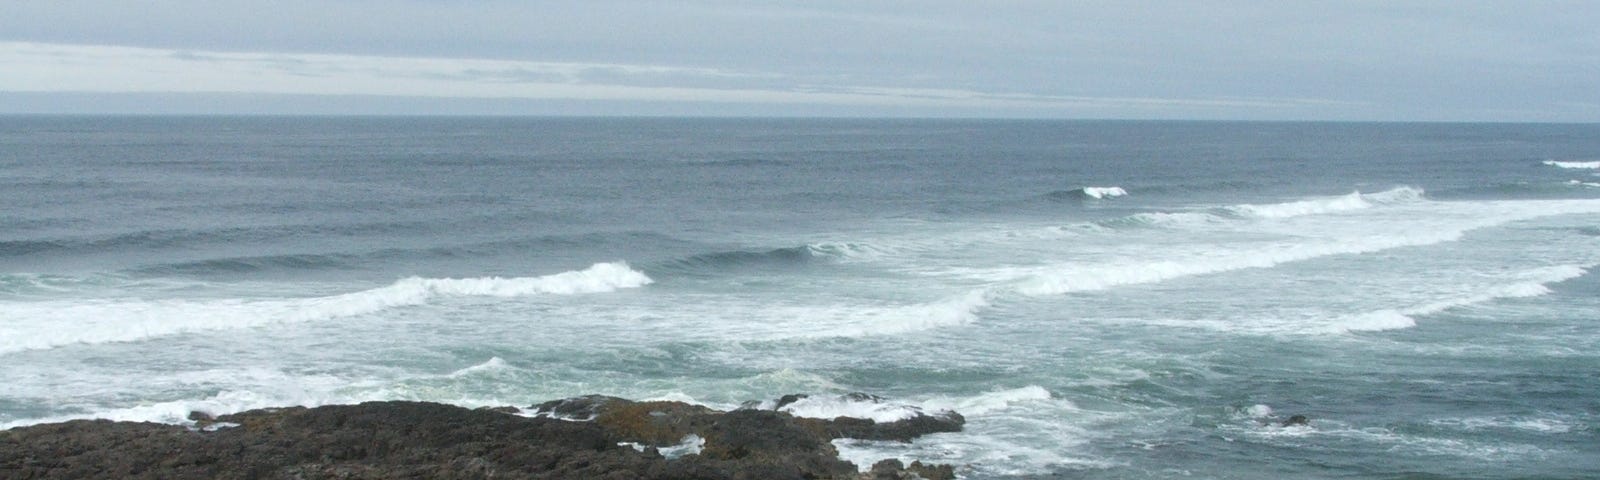 A picture of the beach on a cloudy day, with waves crashing in